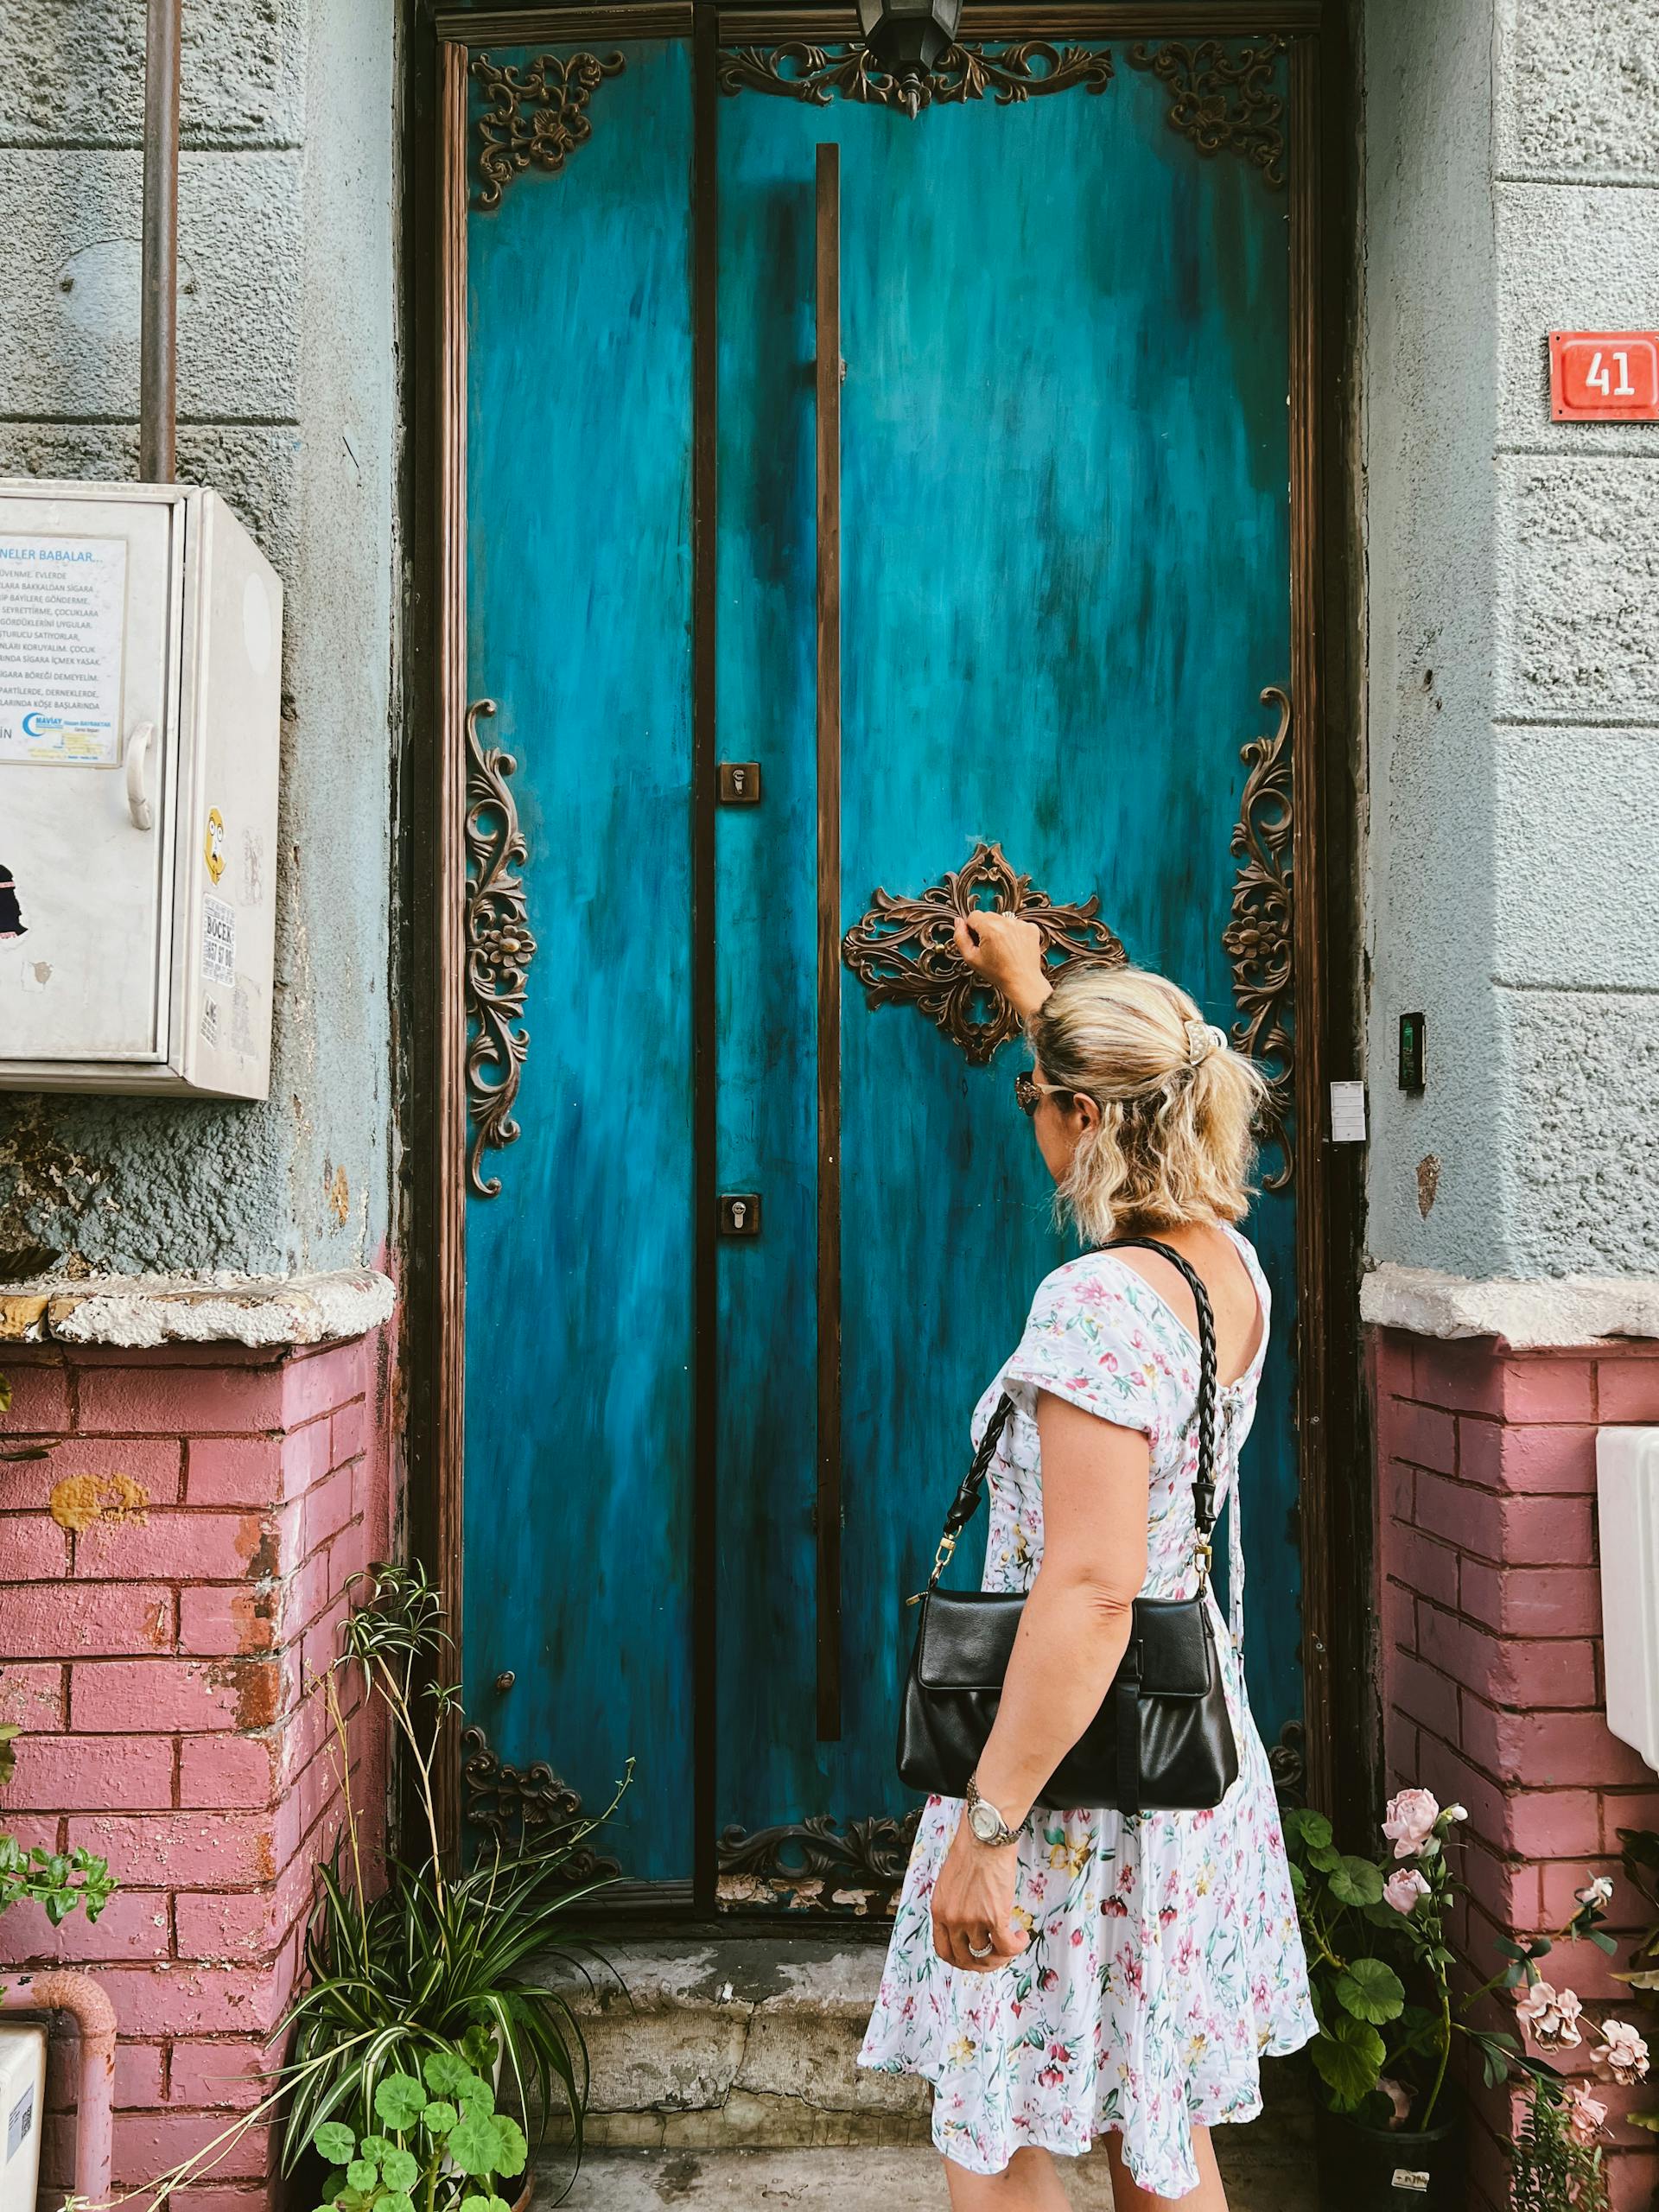 A woman knocking on a door | Source: Pexels